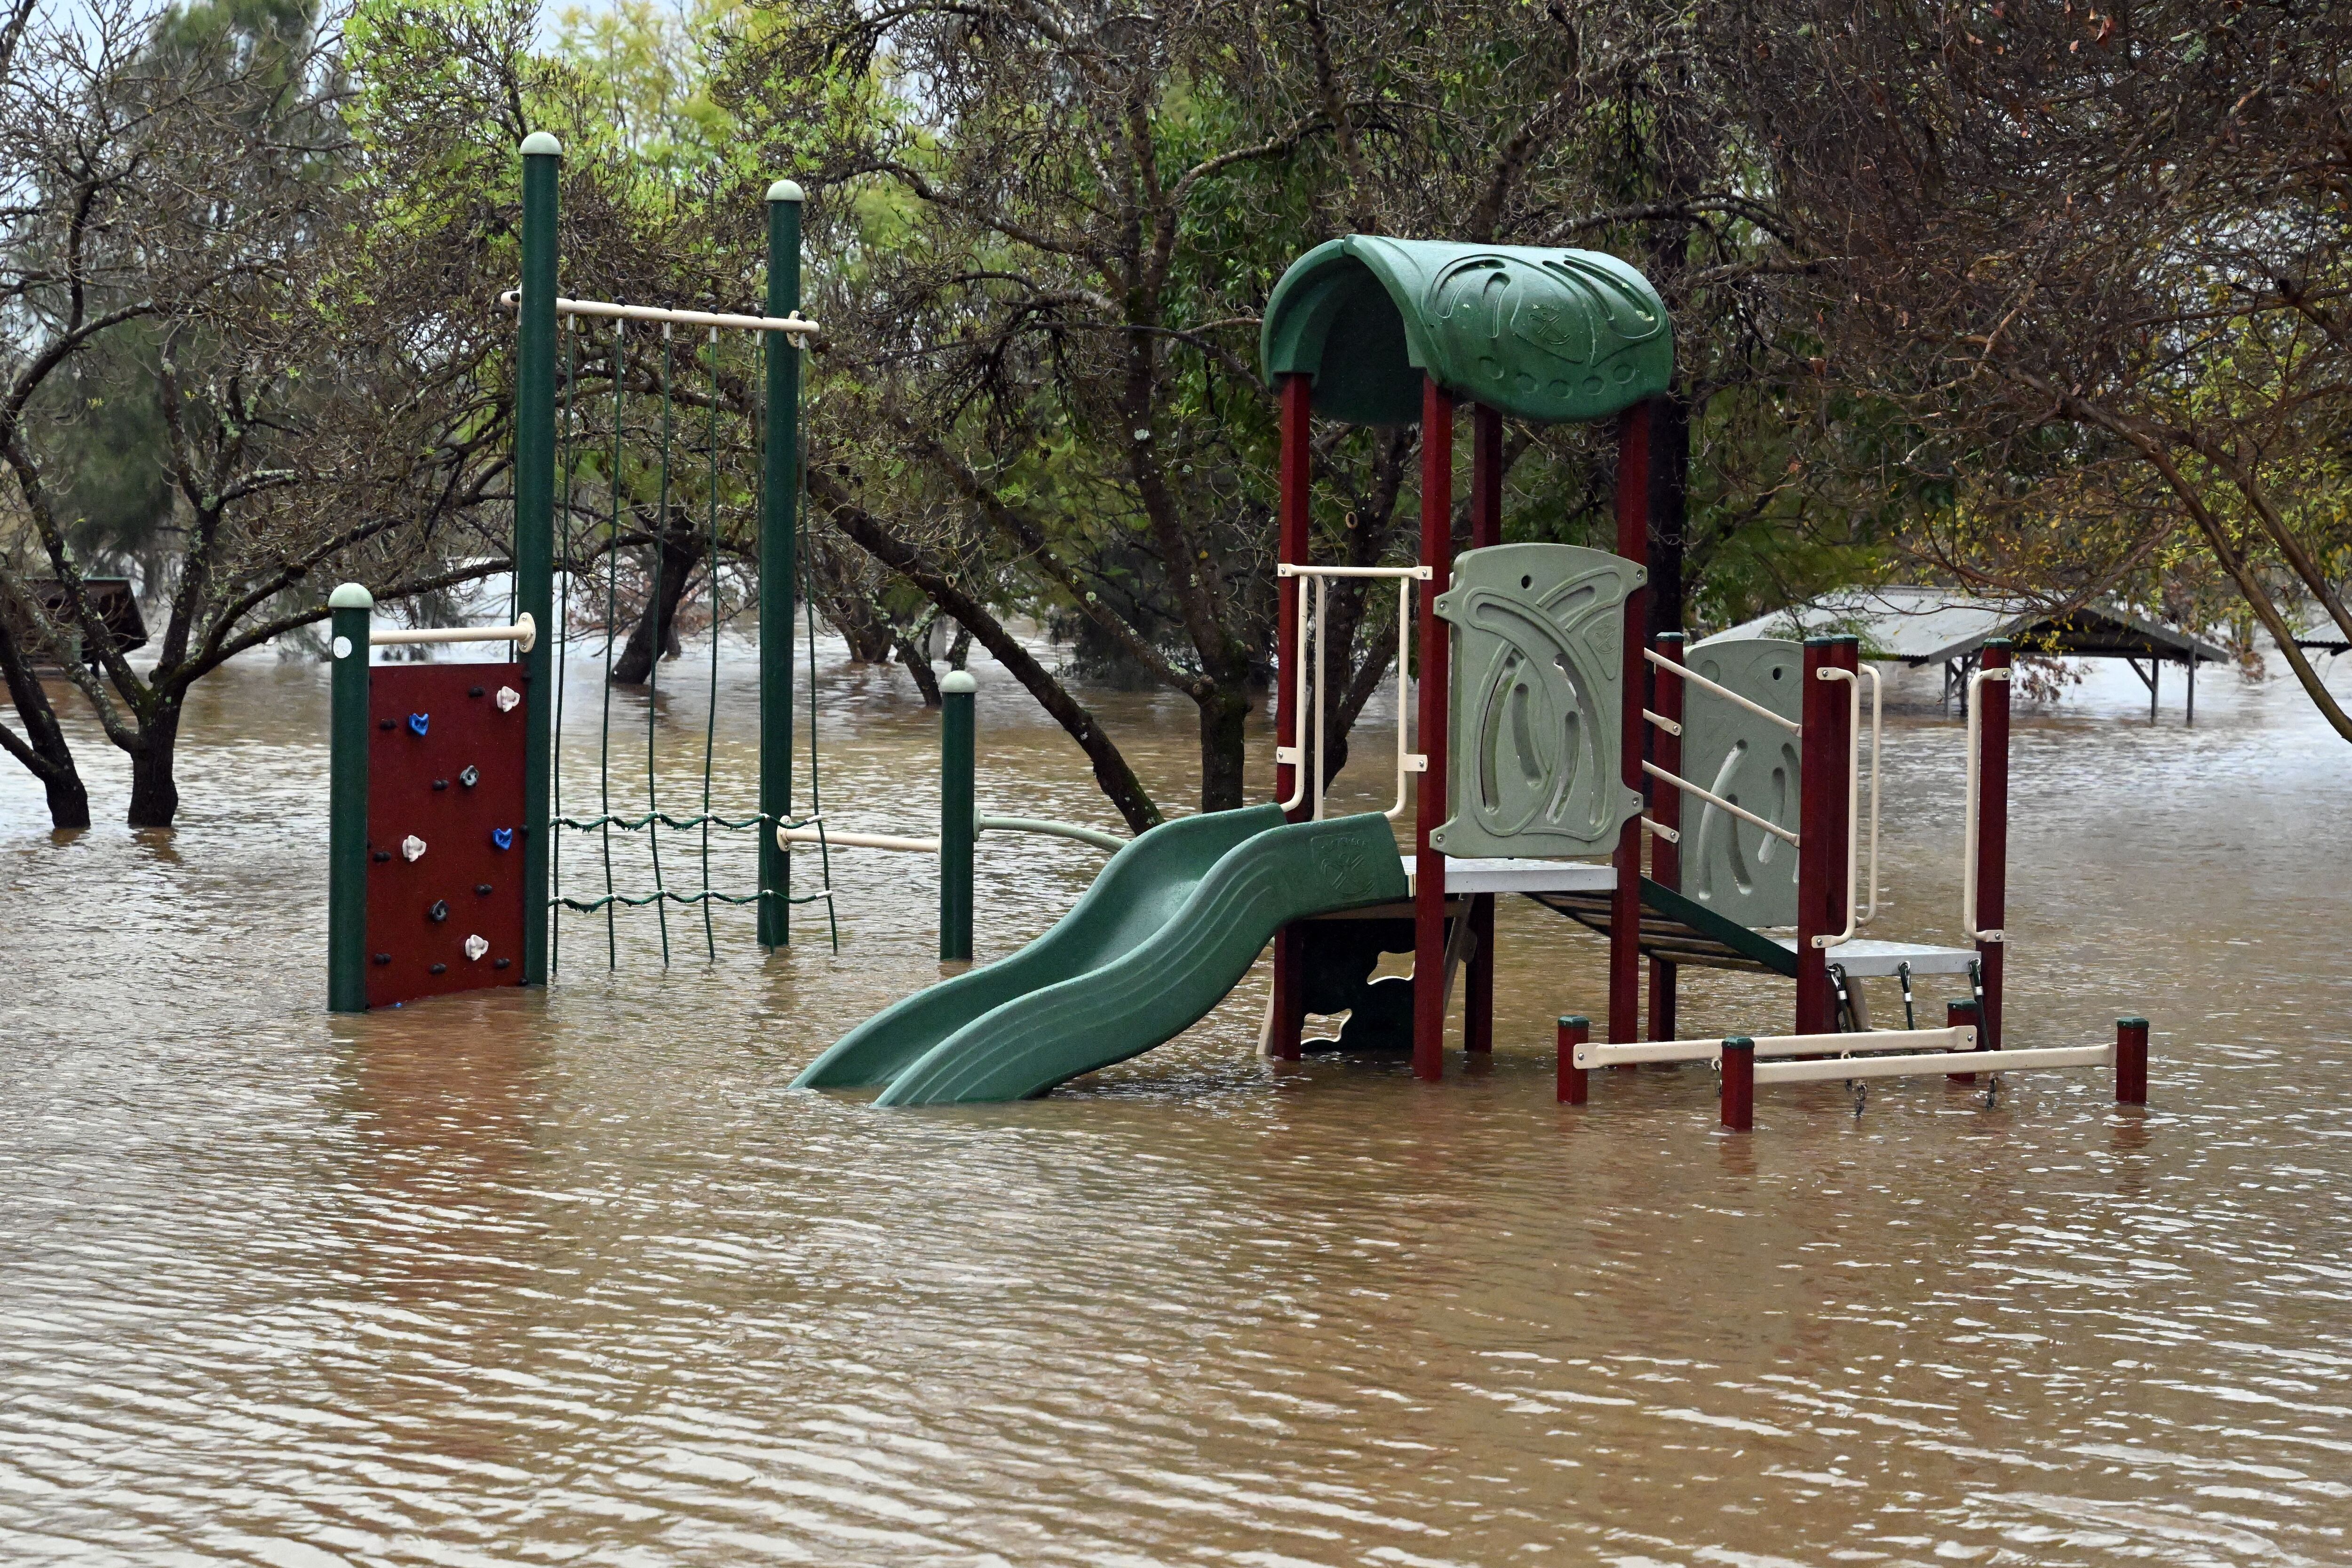 A children's play area is seen inundated by floodwaters in Camden, south-west Sydney, Australia.